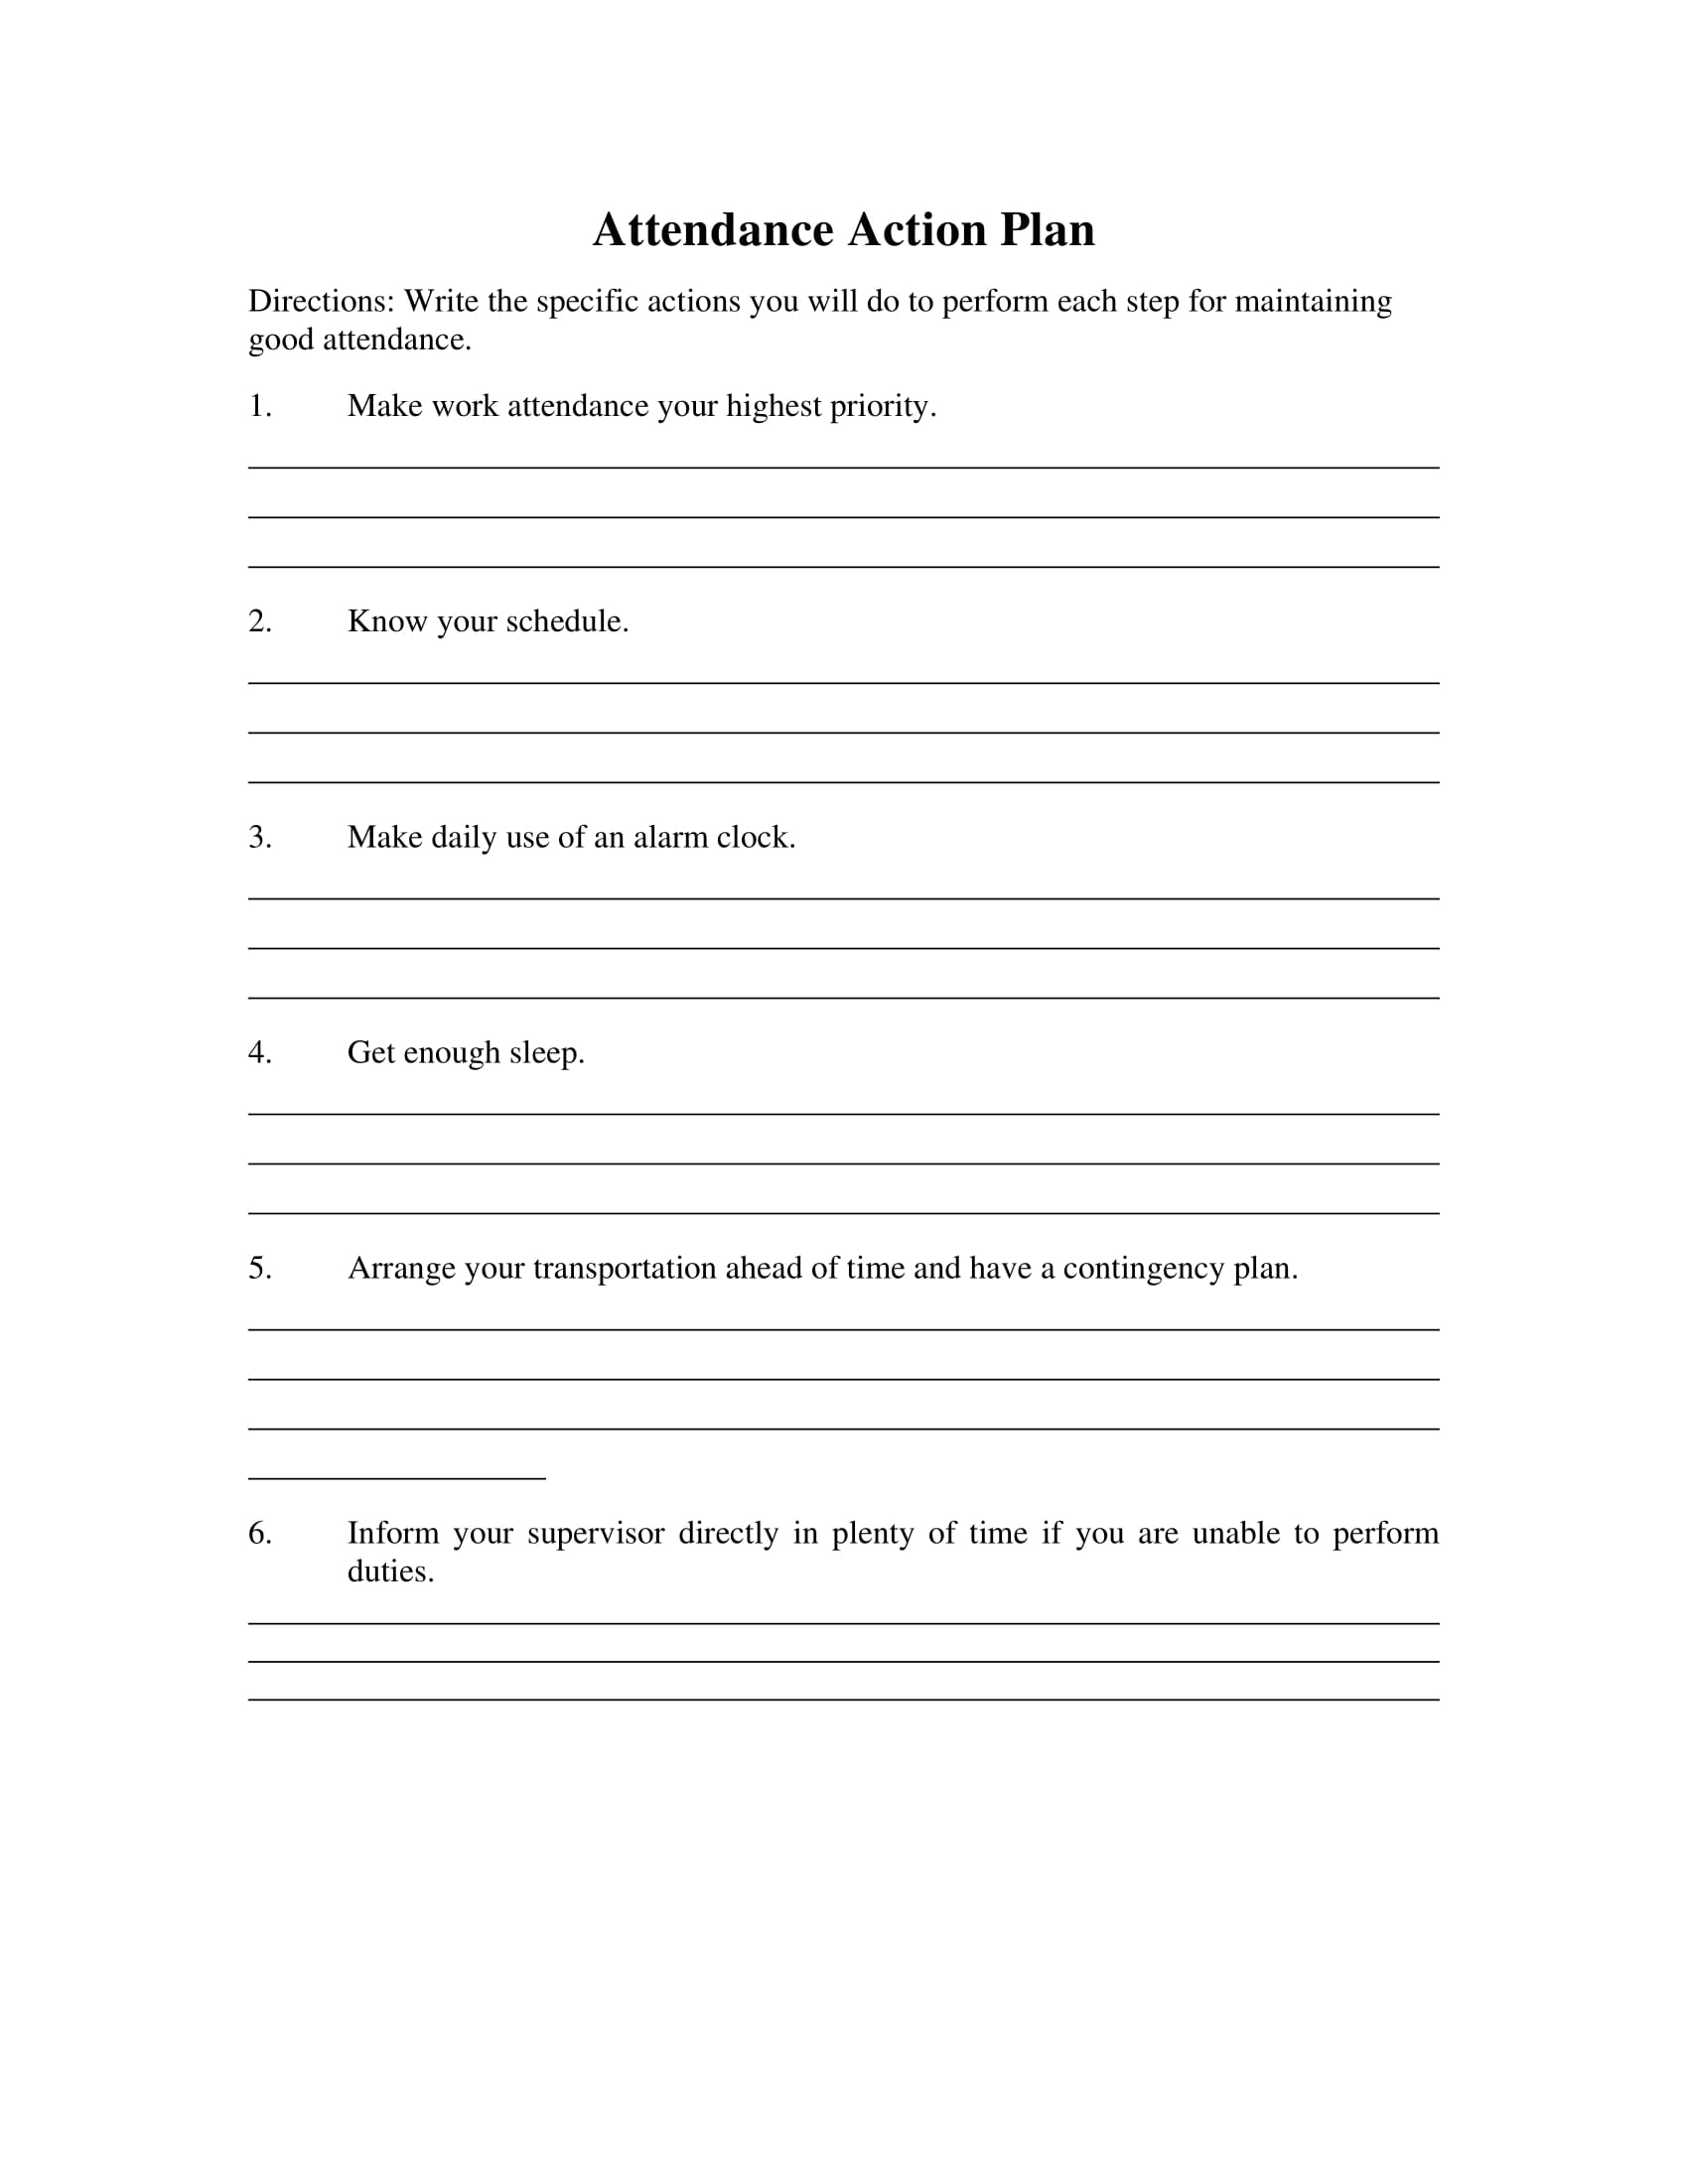 attendance action plan form example